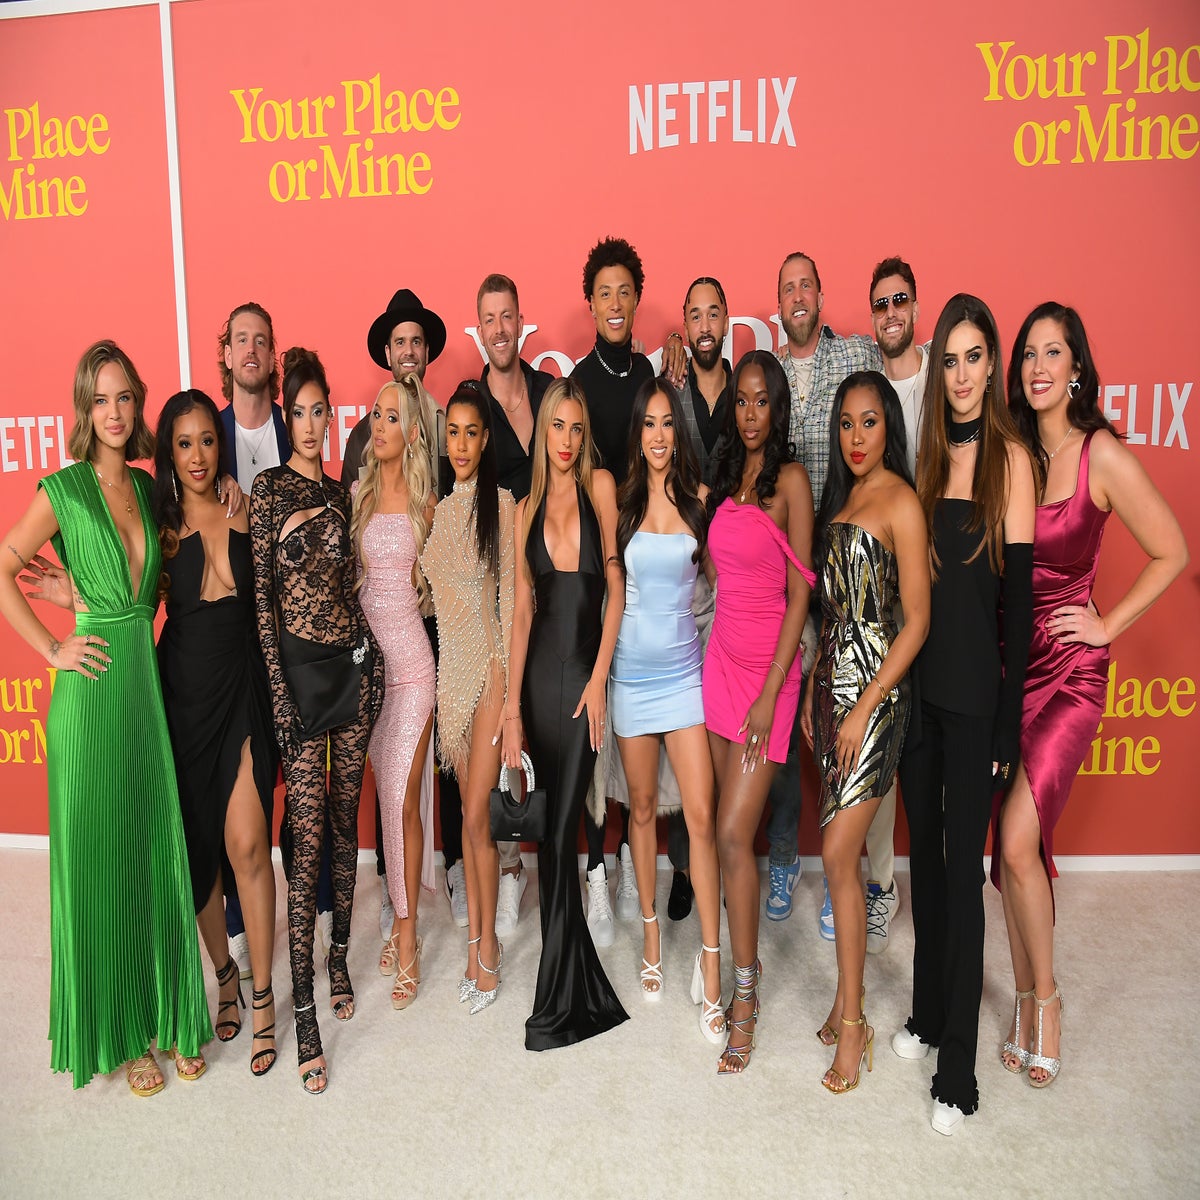 New Netflix series Perfect Match cast features reality stars